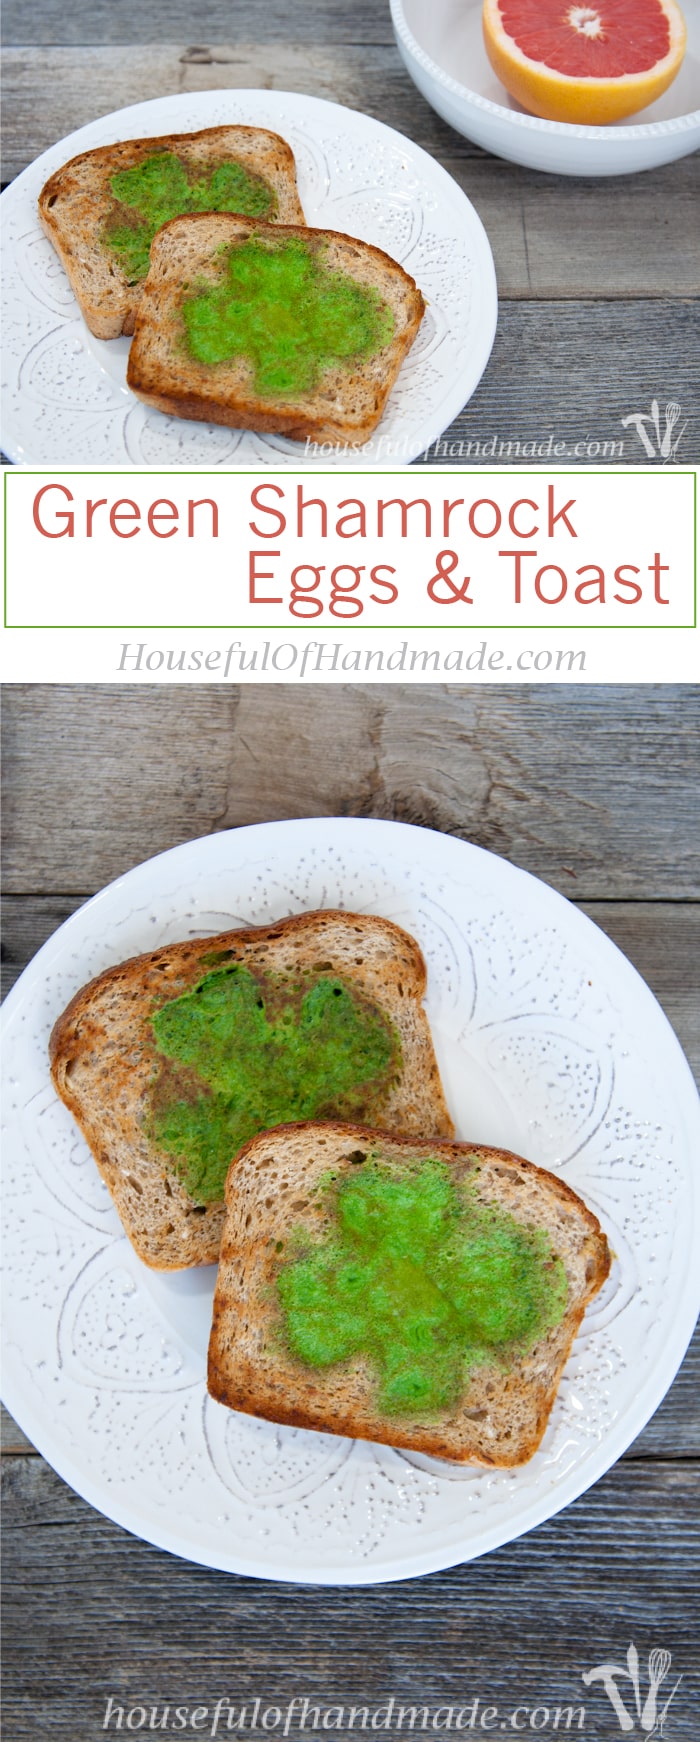 I love this idea! Celebrate St. Patrick's Day with a festive, and healthy, breakfast! These easy green shamrock eggs & toast are made with spinach to turn the eggs green. | Housefulofhandmade.com